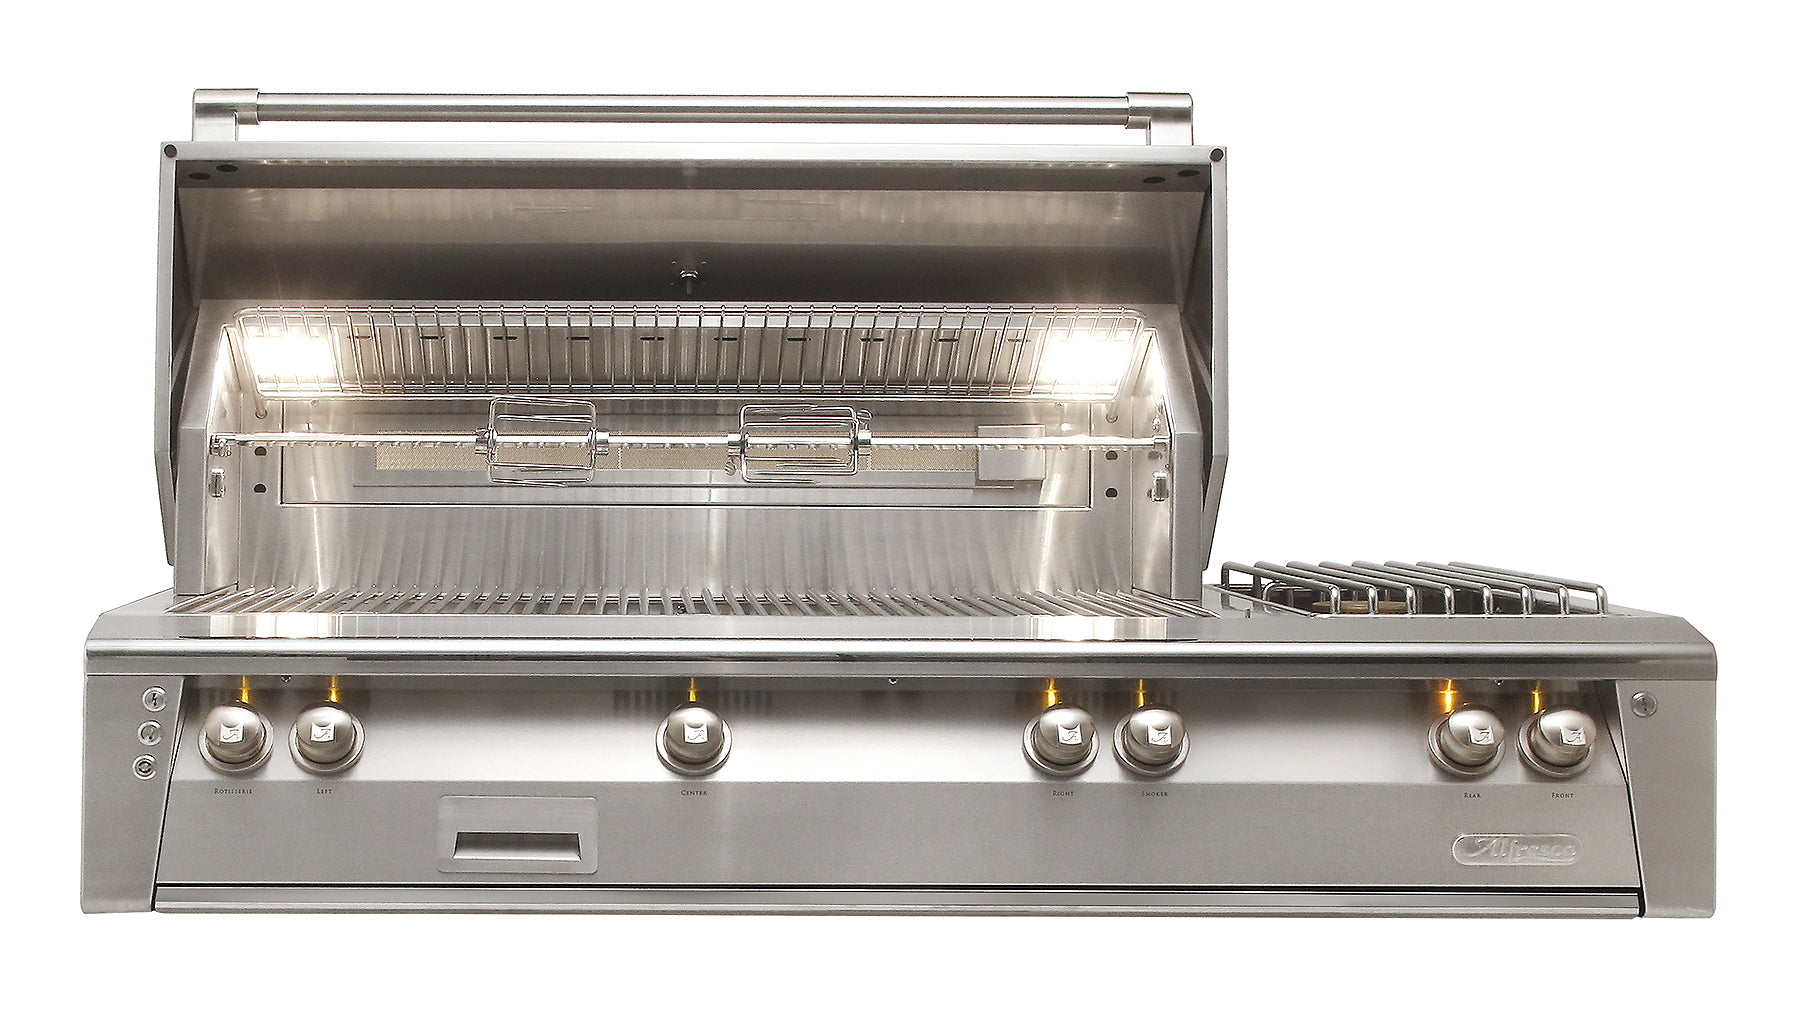 Alfresco - 3 Burner Natural Gas BBQ in Stainless - ALXE-56SZR